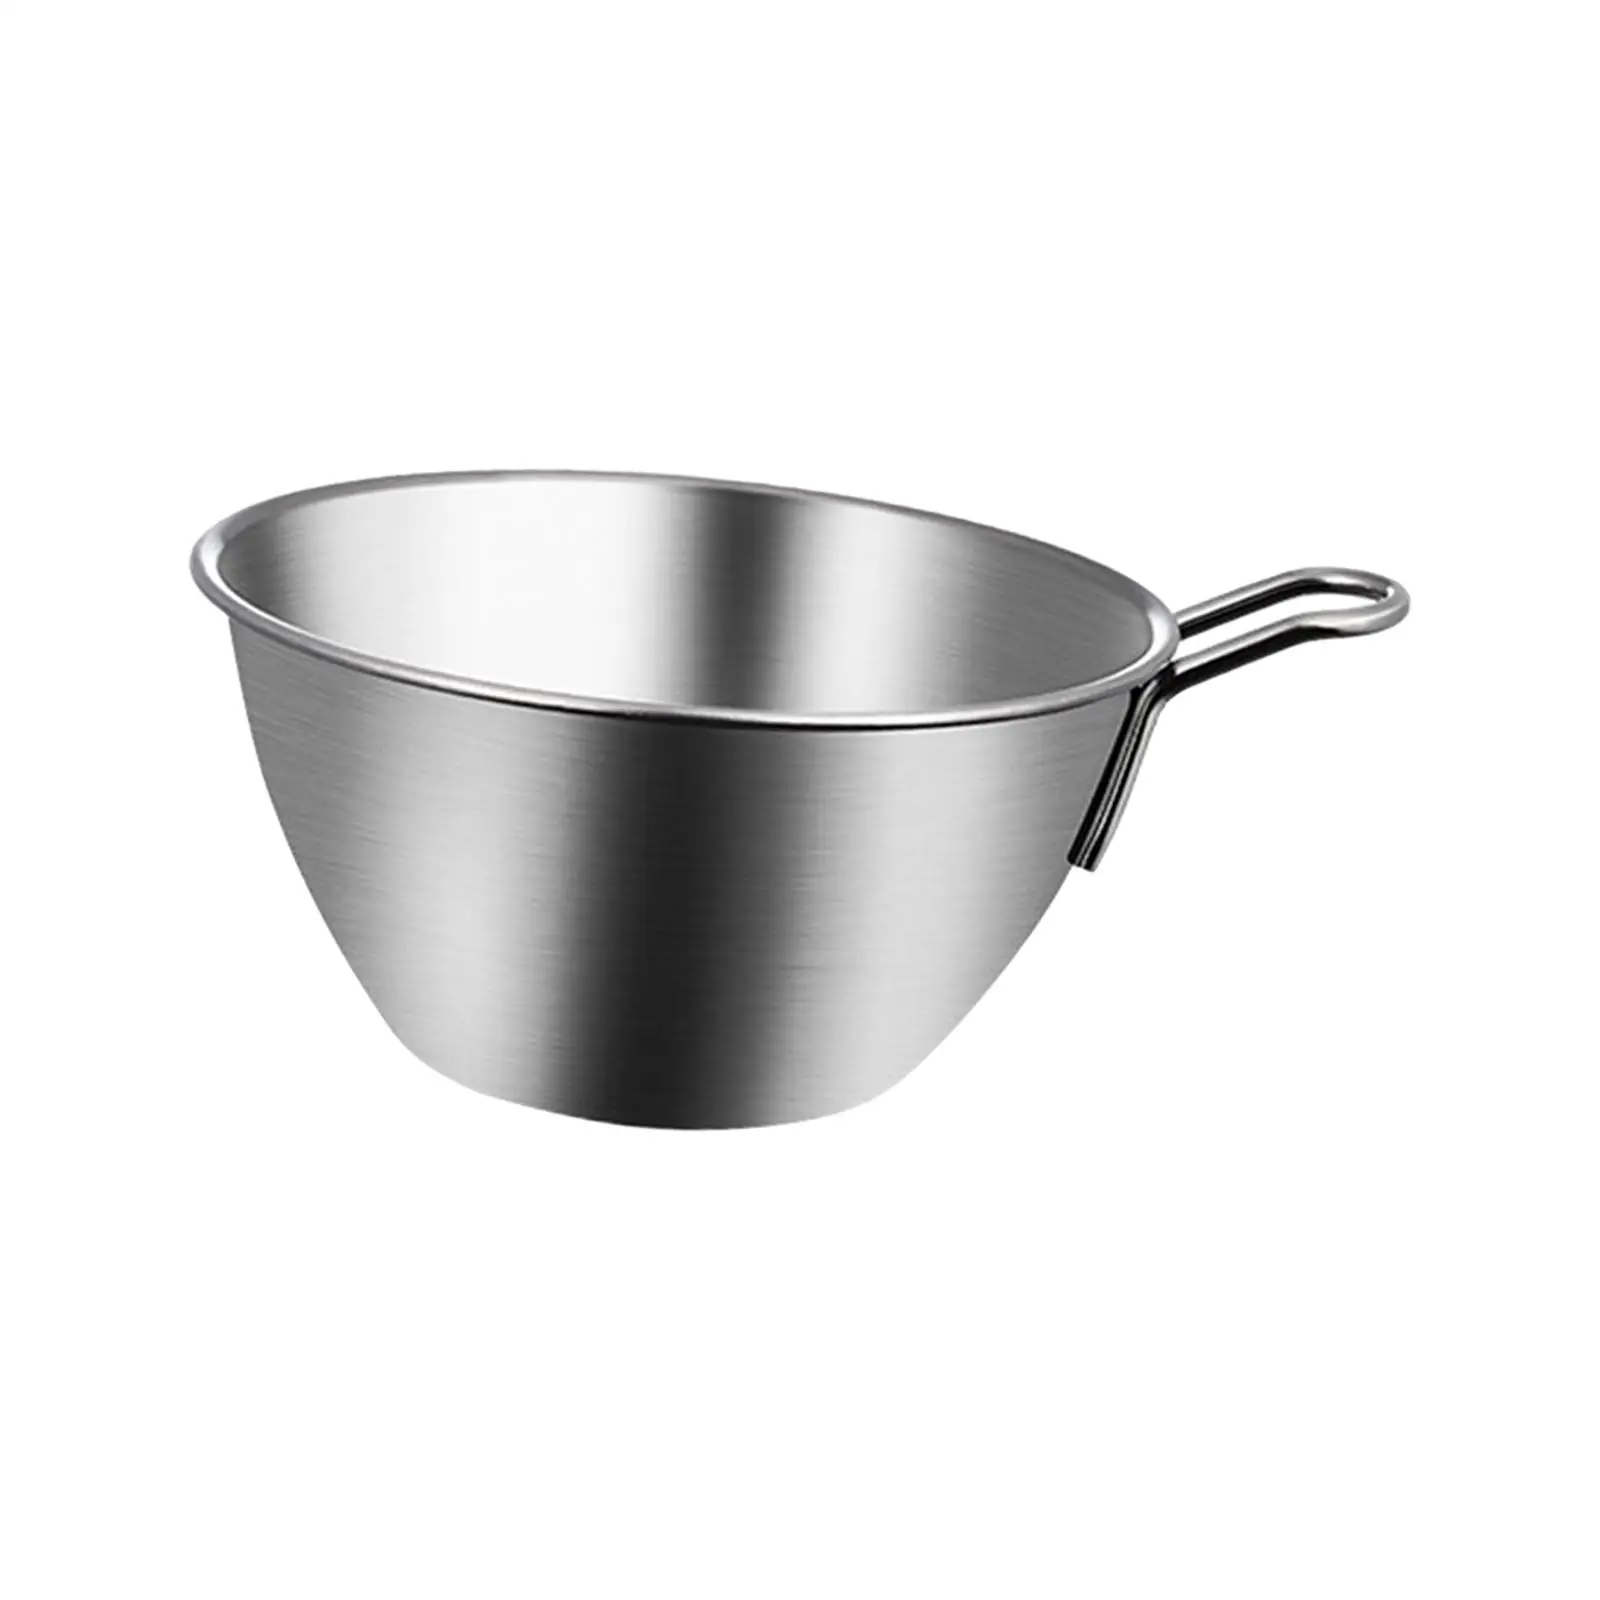 Stainless Steel Mixing Bowl Measurement Guide Cooking Bowl Egg Whisking Bowl Metal Bowl for Sauce Kitchen Soup Baking Meal Prep